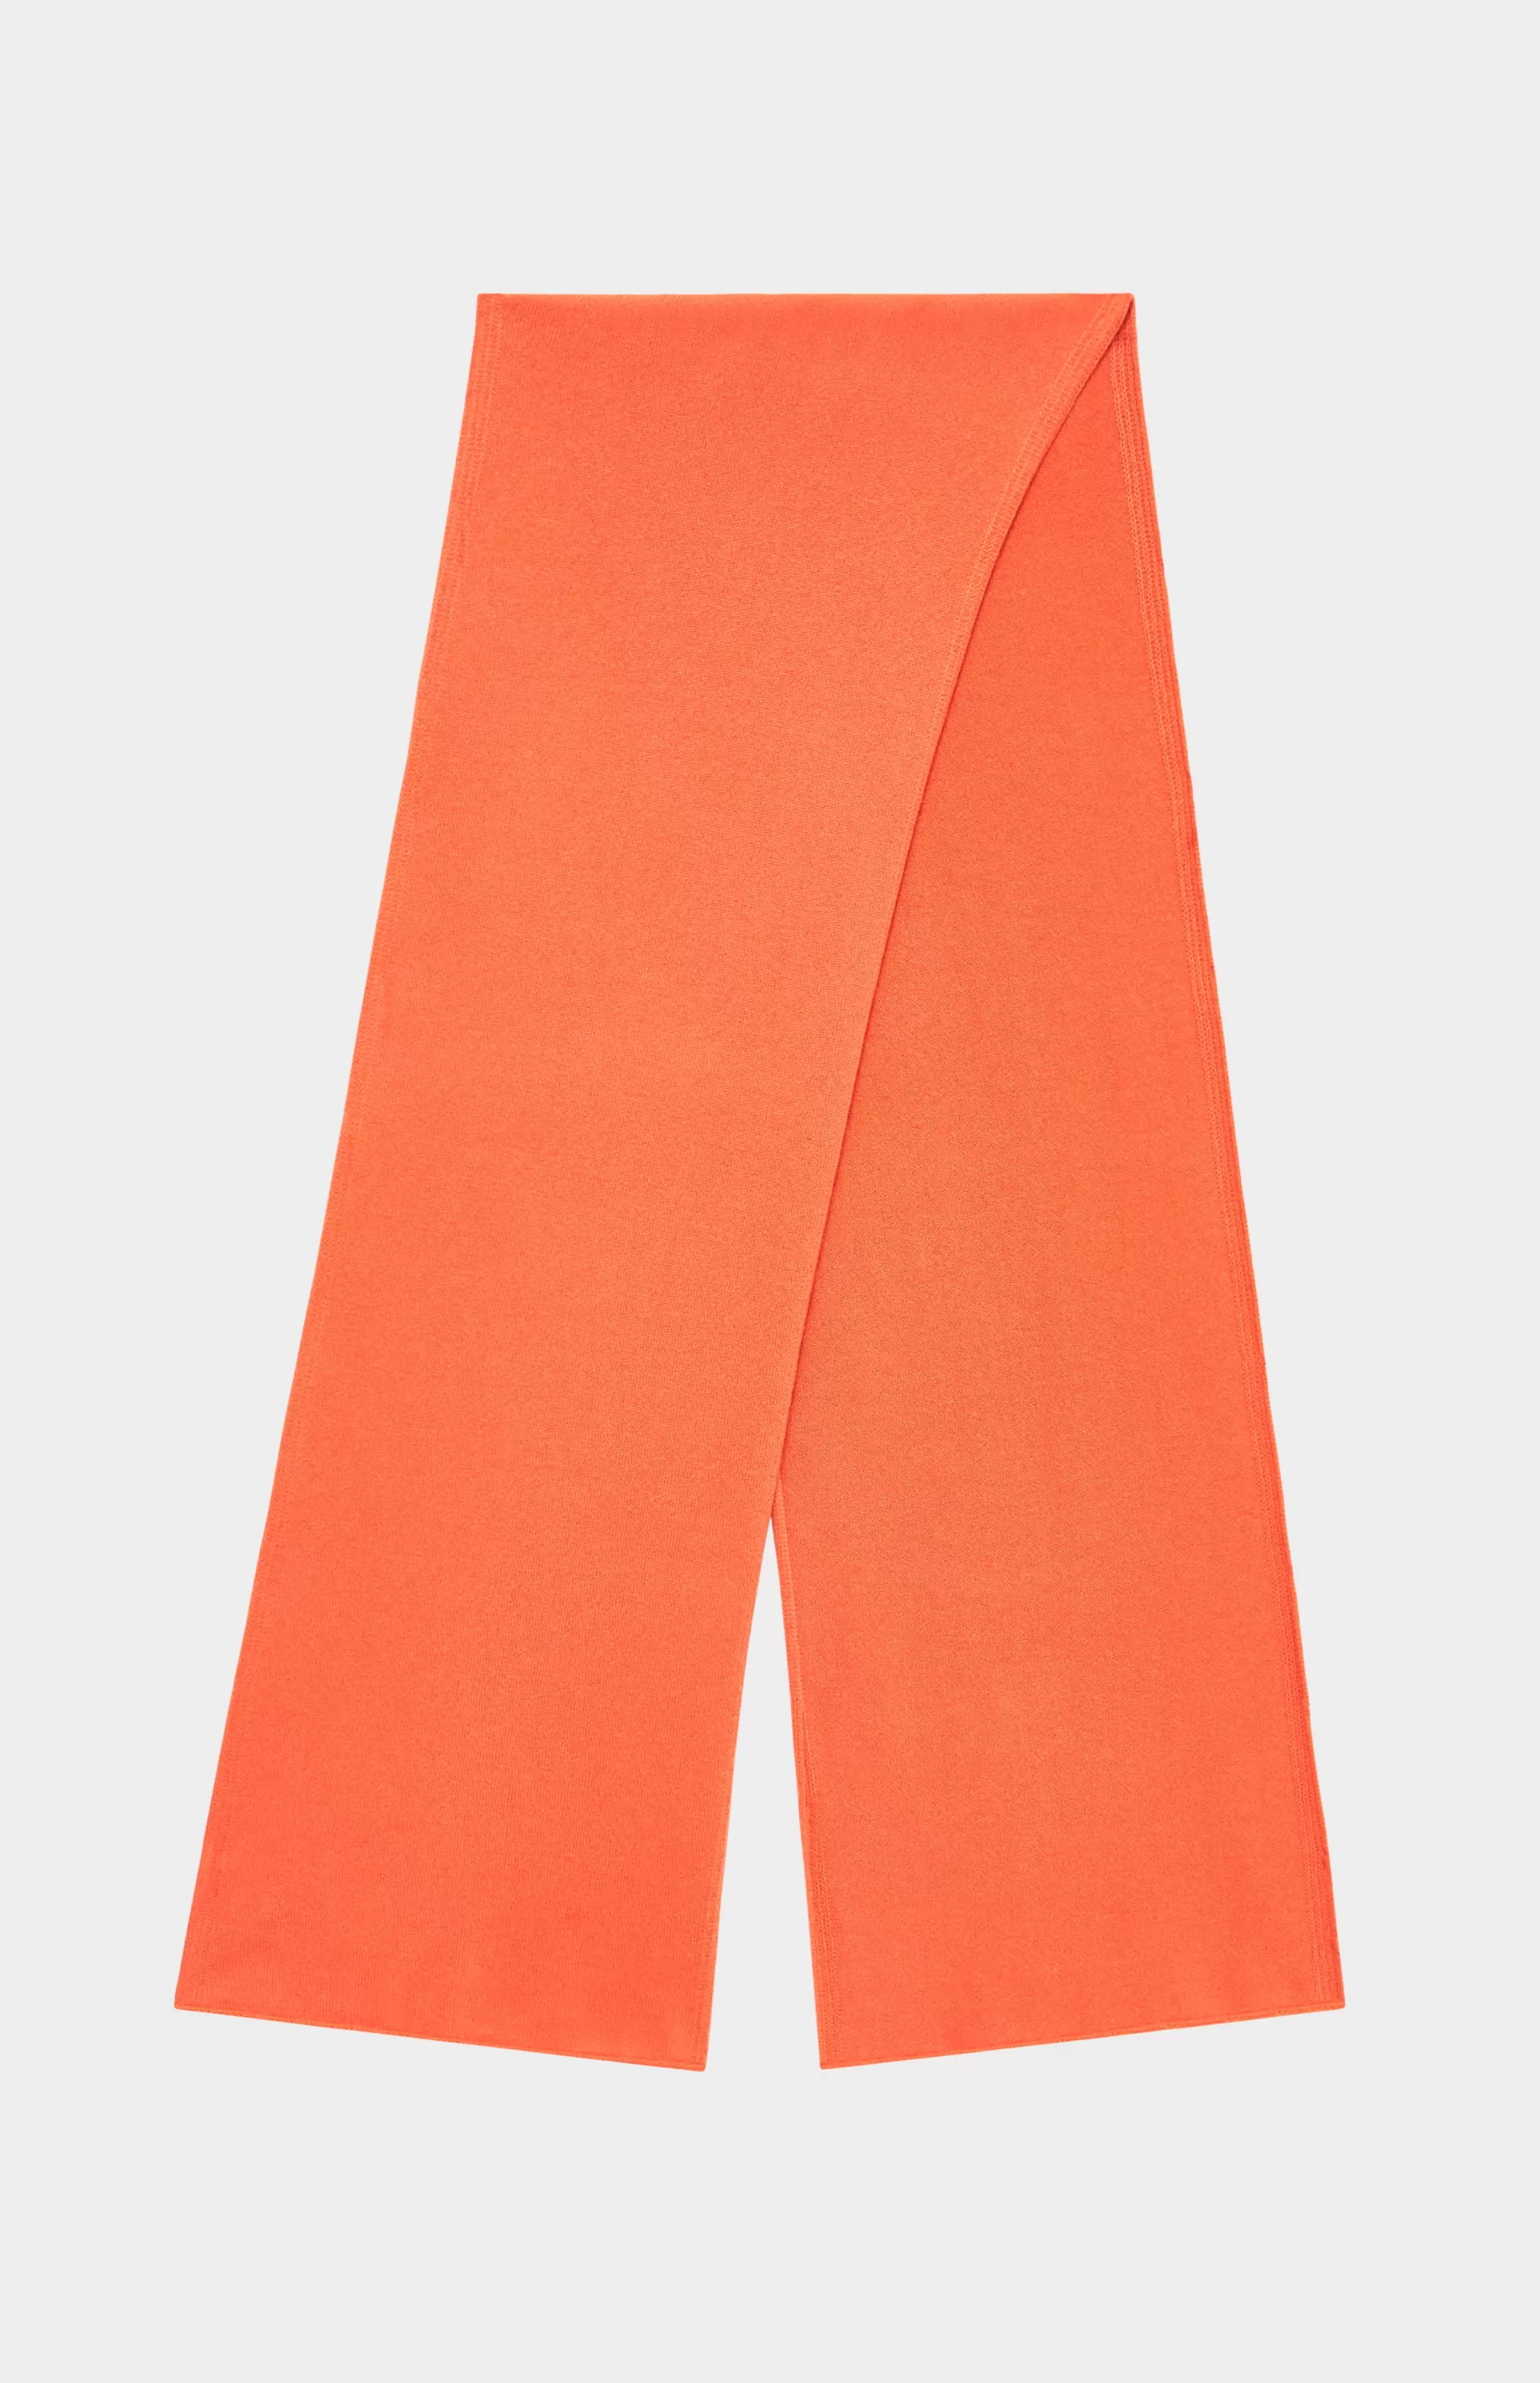 Clearance Cashmere scarf In Bengal Orange Men/Women Gifts For Women